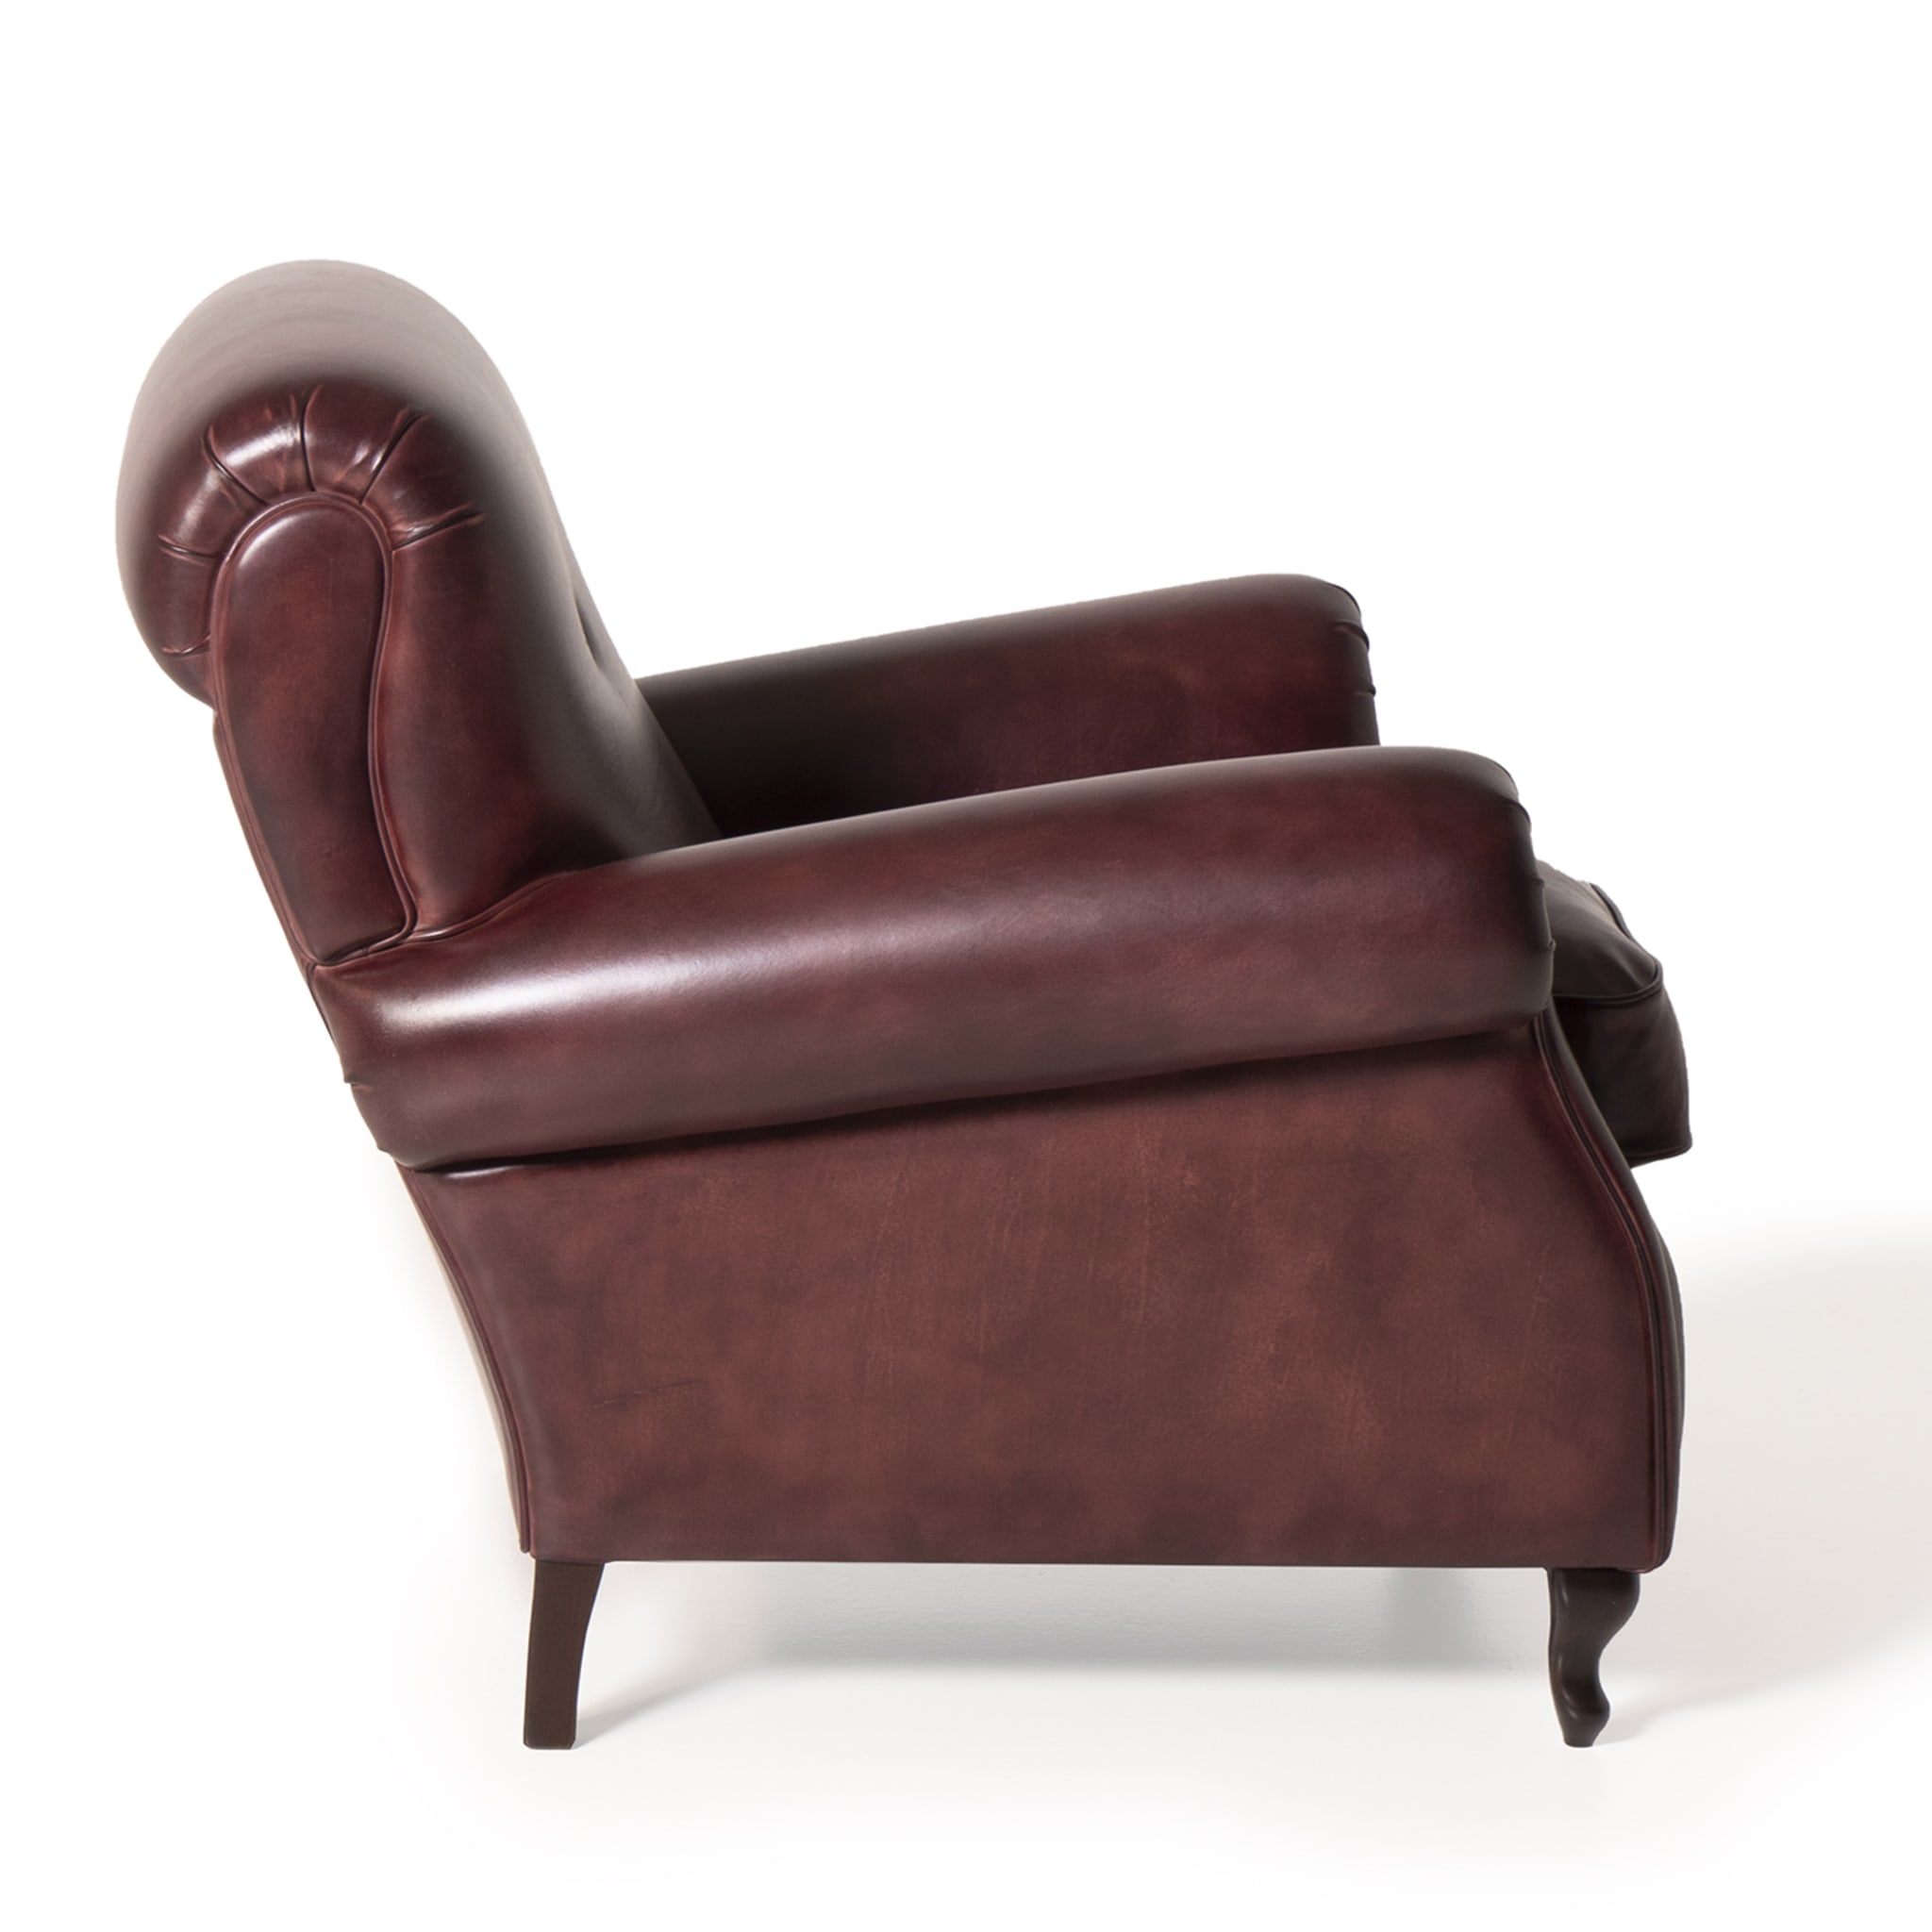 Roma Armchair Tribeca Collection by Marco and Giulio Mantellassi - Alternative view 1